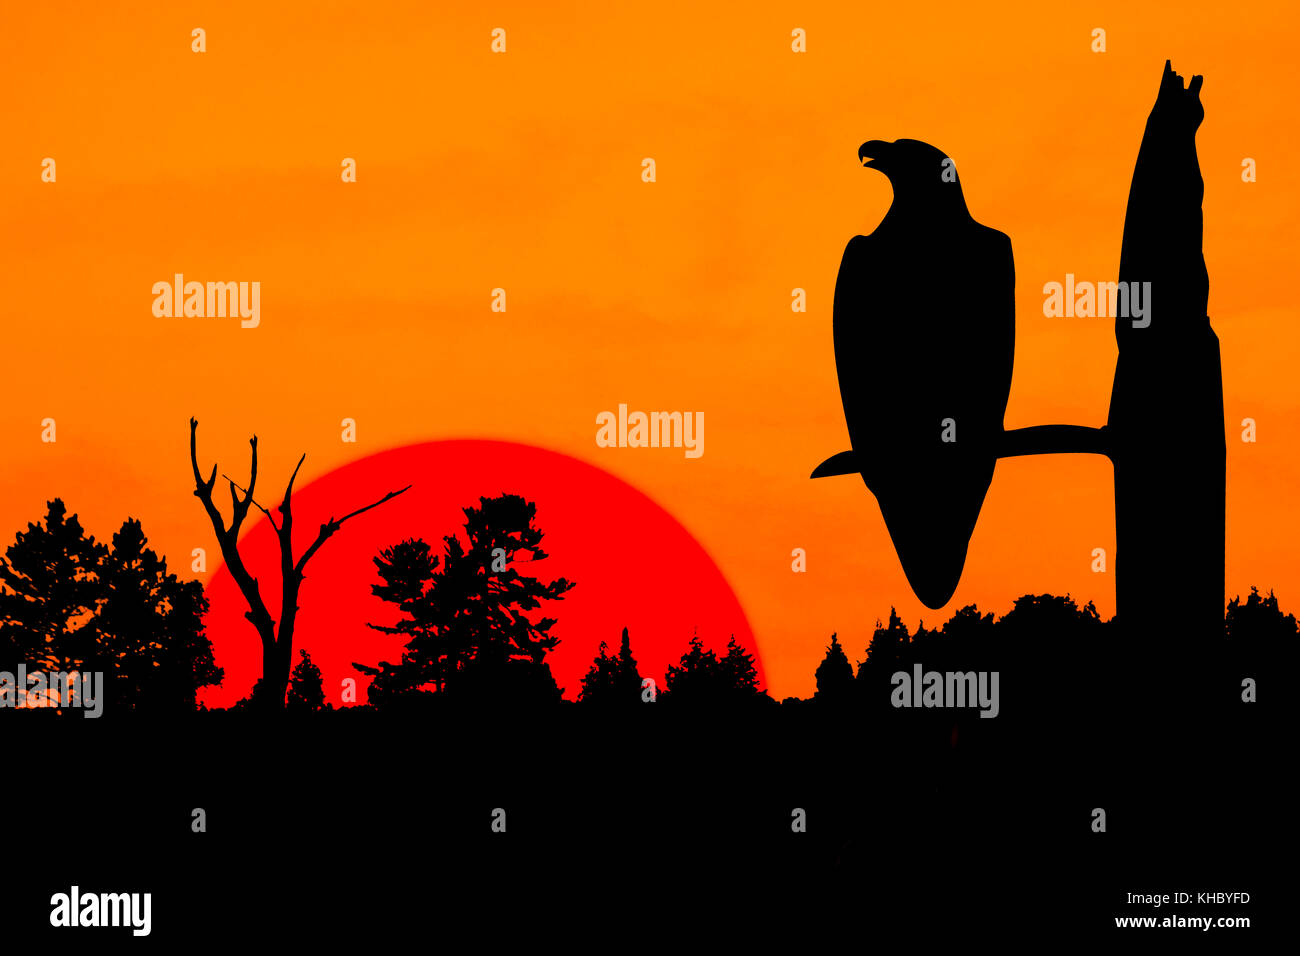 A silhouette of an eagle perched on a leafless tree. The raptor is positioned in front of a burning orange sky and a huge bright red setting sun. Stock Photo